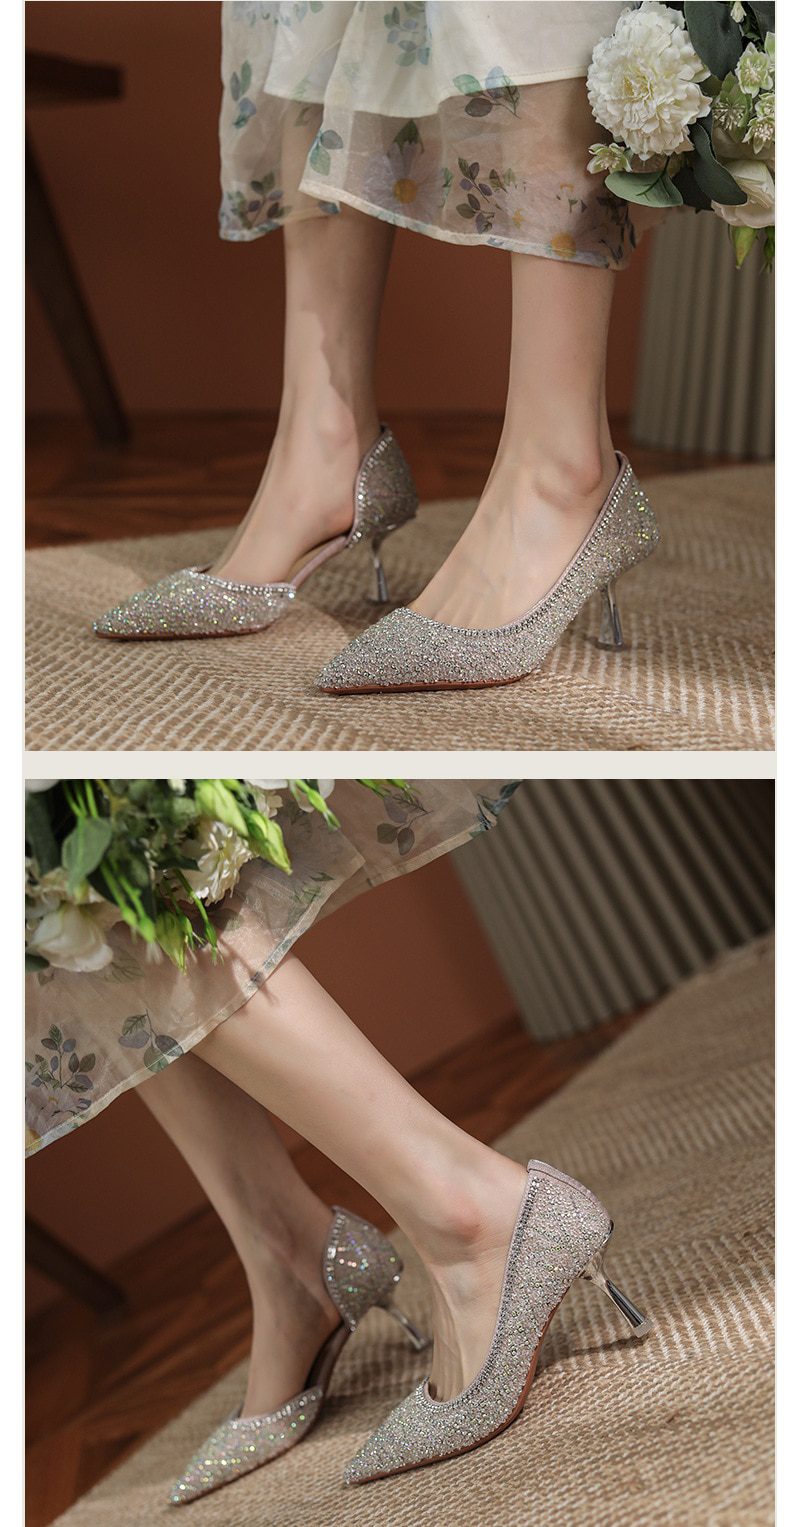 Women's Wedding Bridal Shoes 2021 New Crystal Elegant Pointed Toe Medium Heel Sexy Women's Party Shoes Pumps Women Shoes